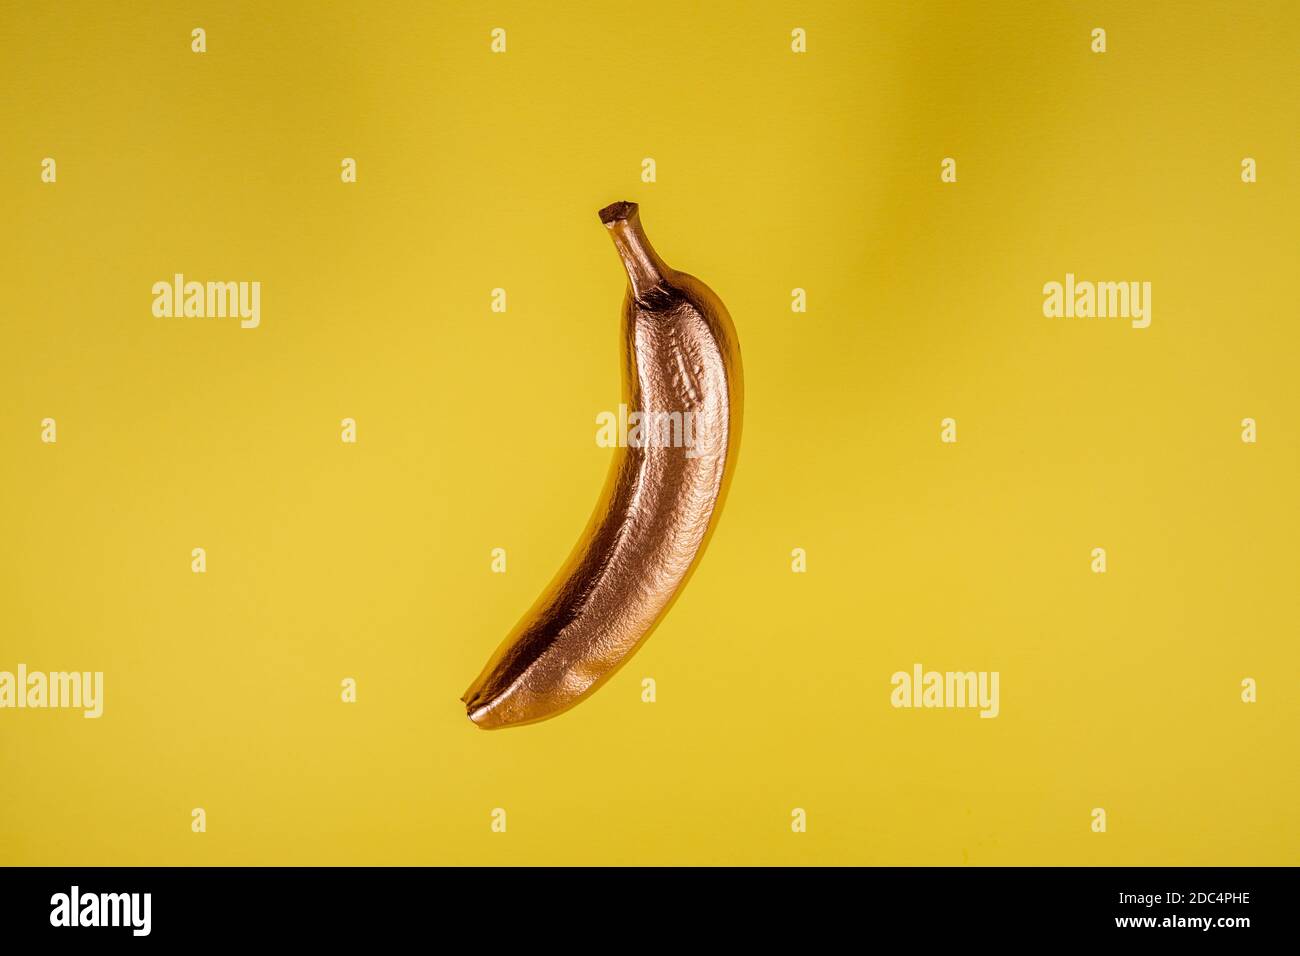 Copper gold floating banana on yellow background. Minimal food concept Stock Photo